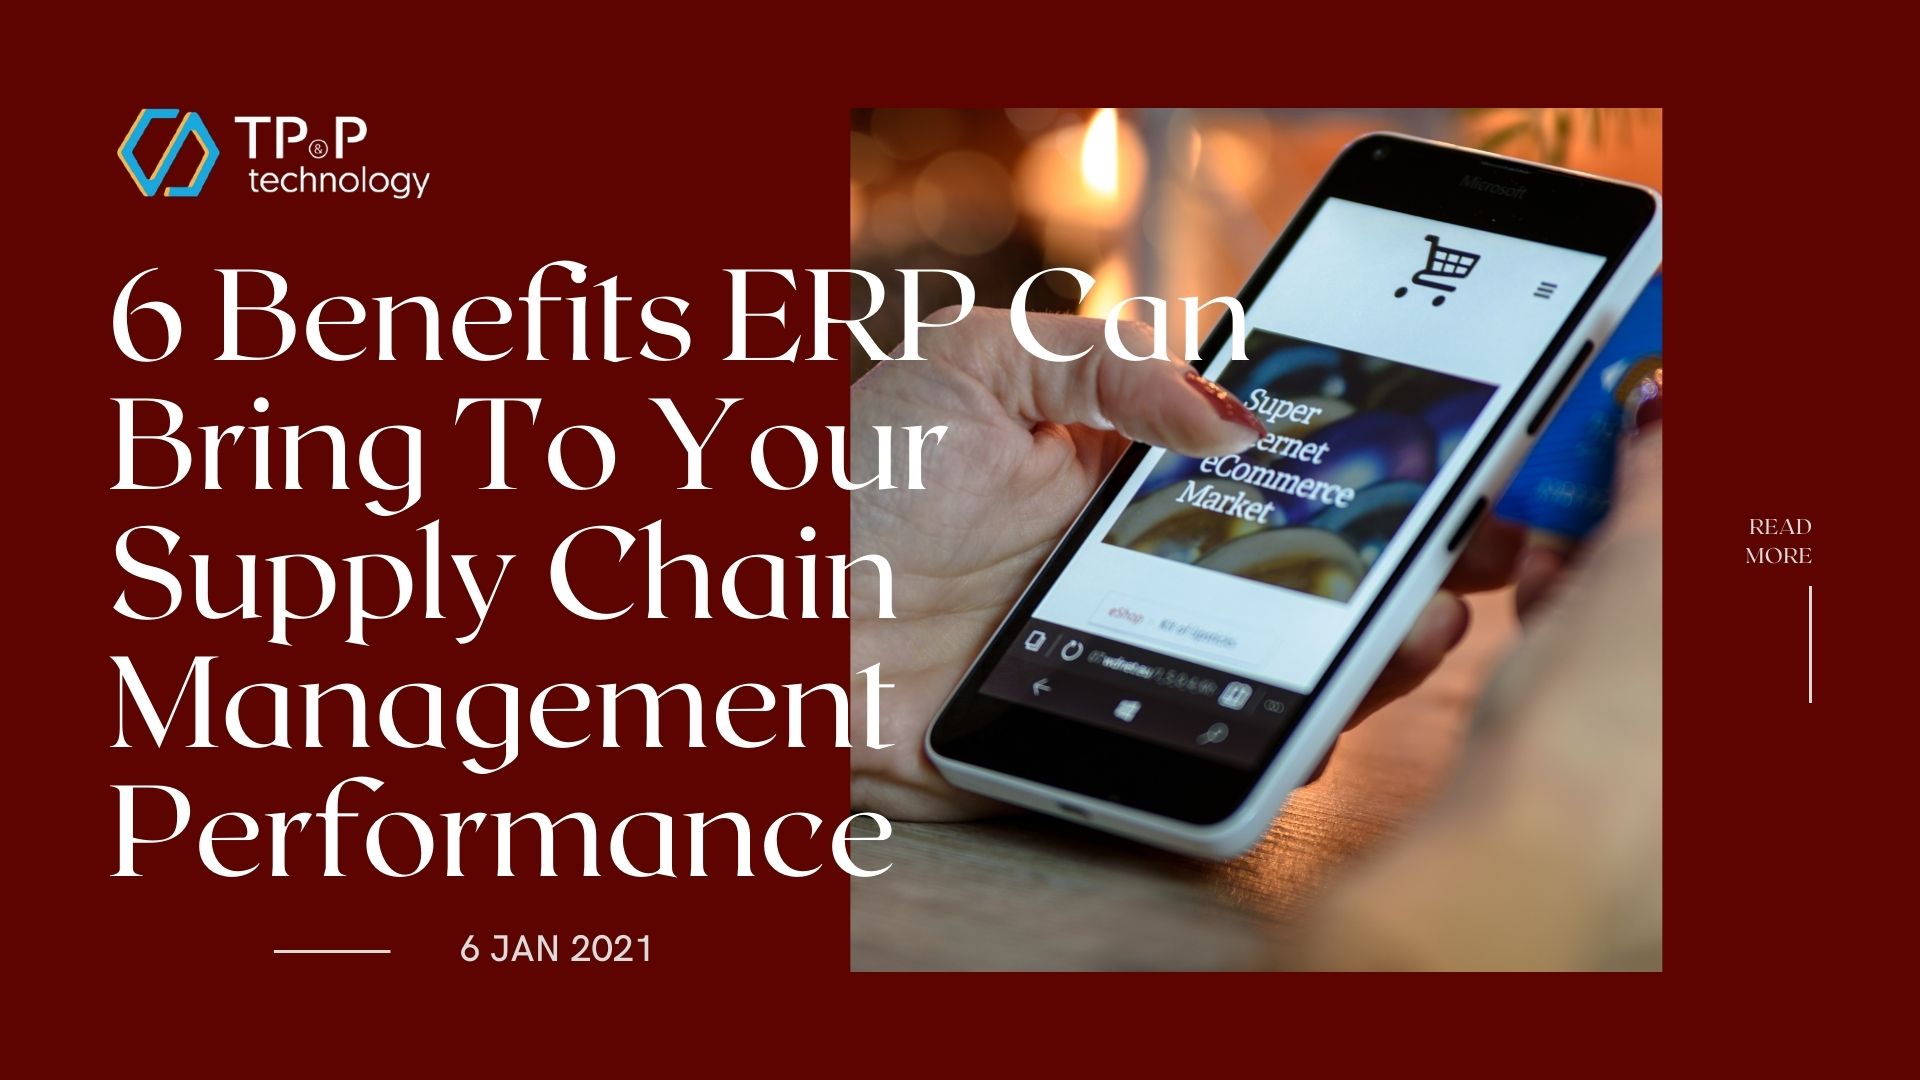 6 Benefits ERP Can Bring To Your Supply Chain Management Performance